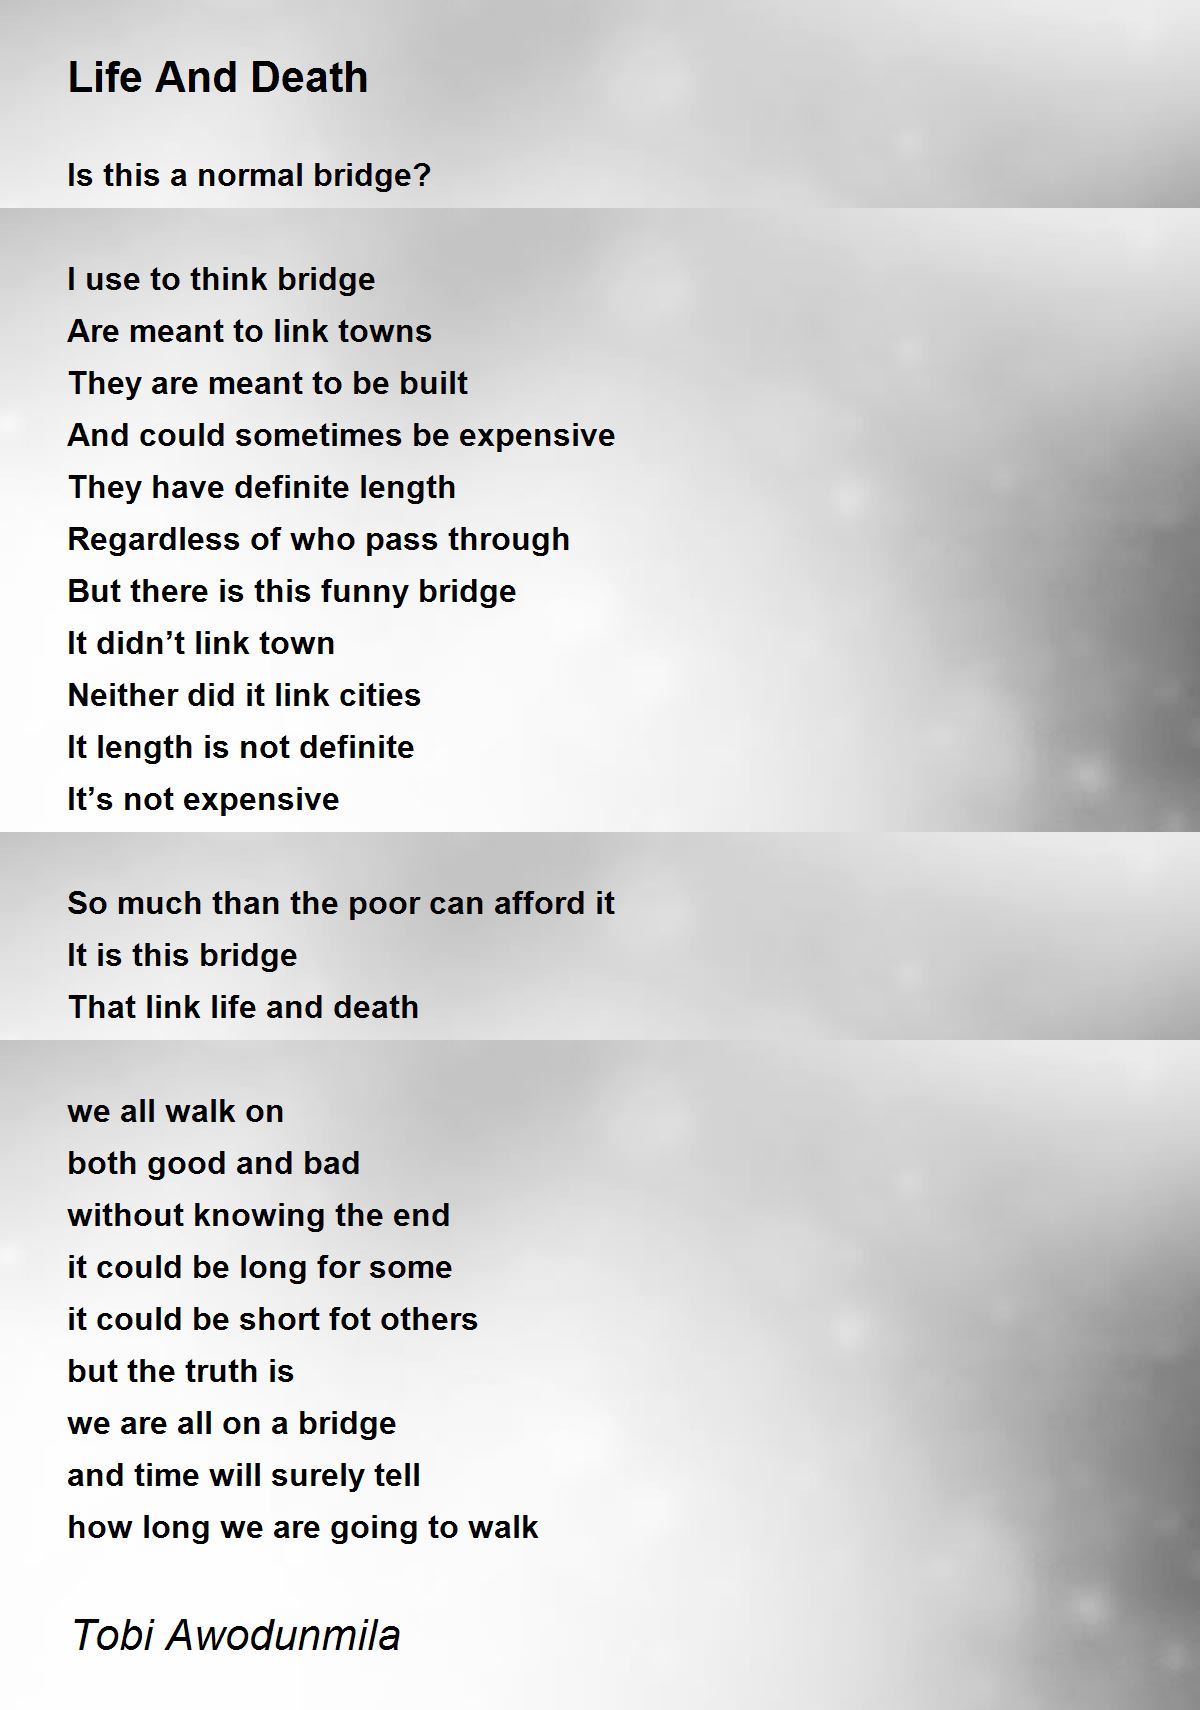 Life And Death - Life And Death Poem by Tobi Awodunmila